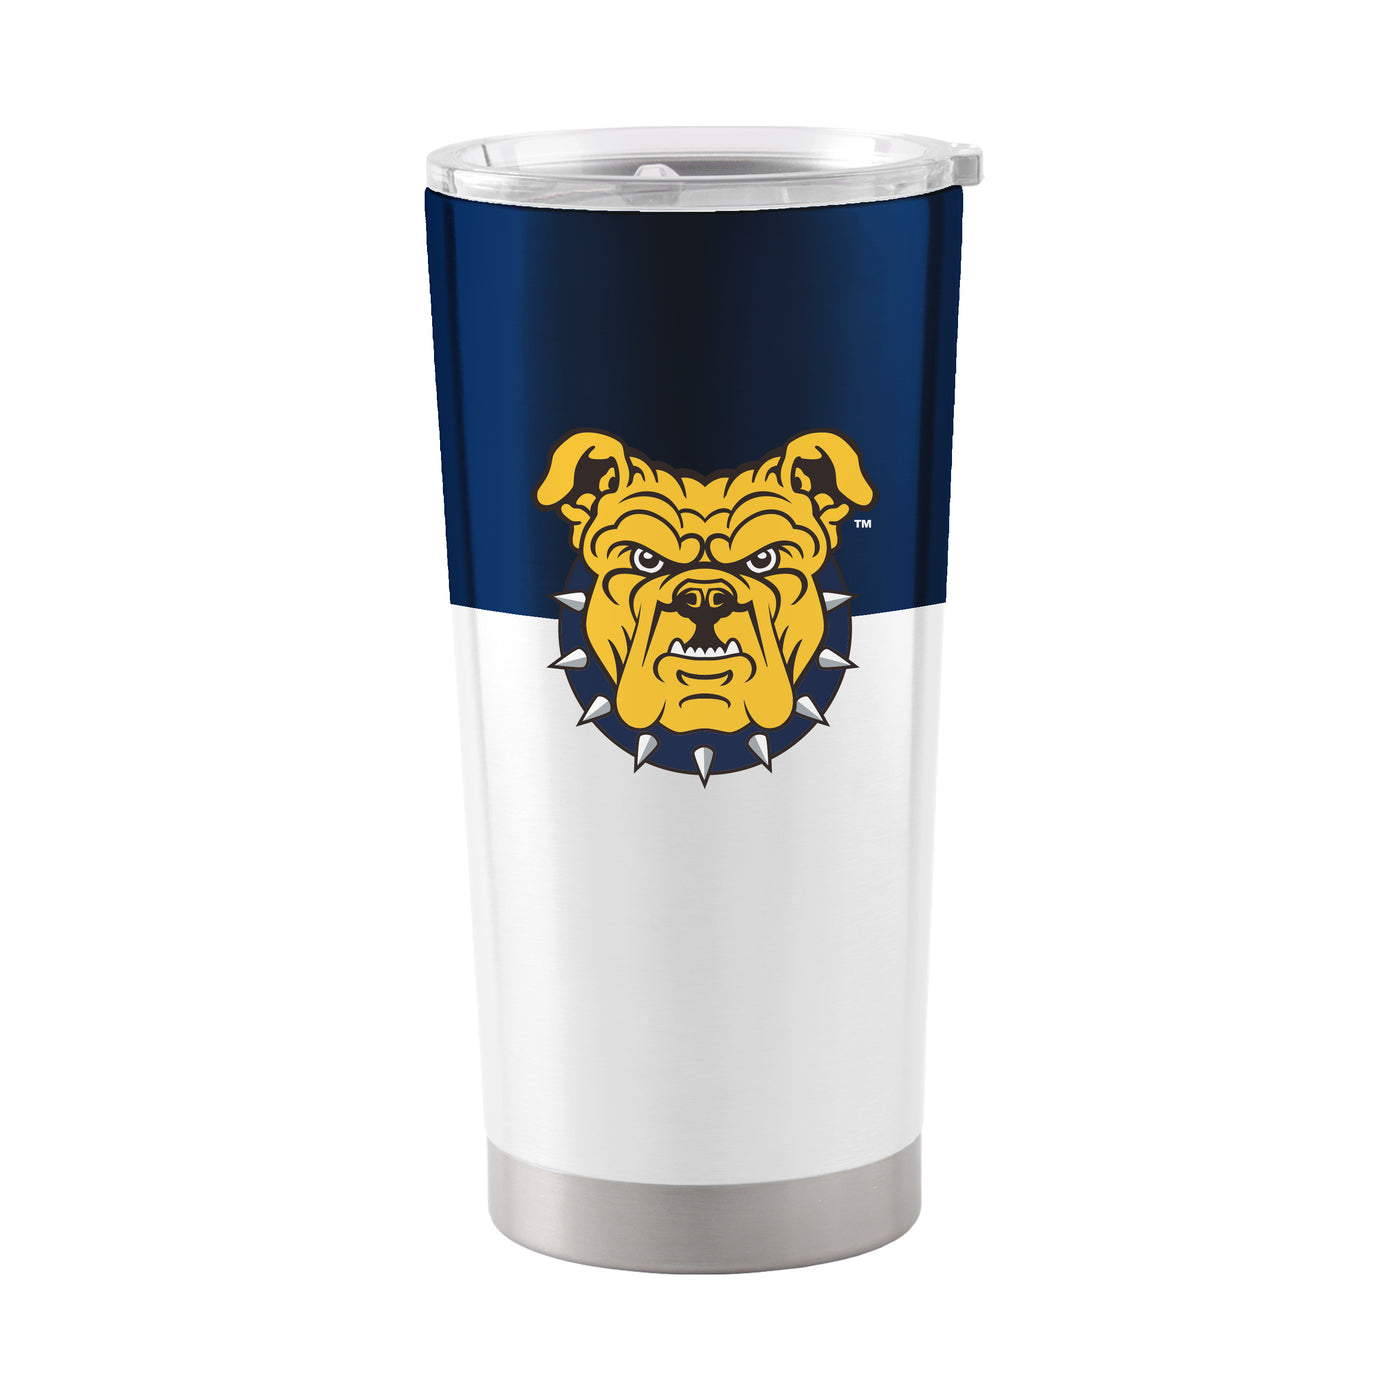 NC A&T State Colorblock 20oz Stainless Tumbler